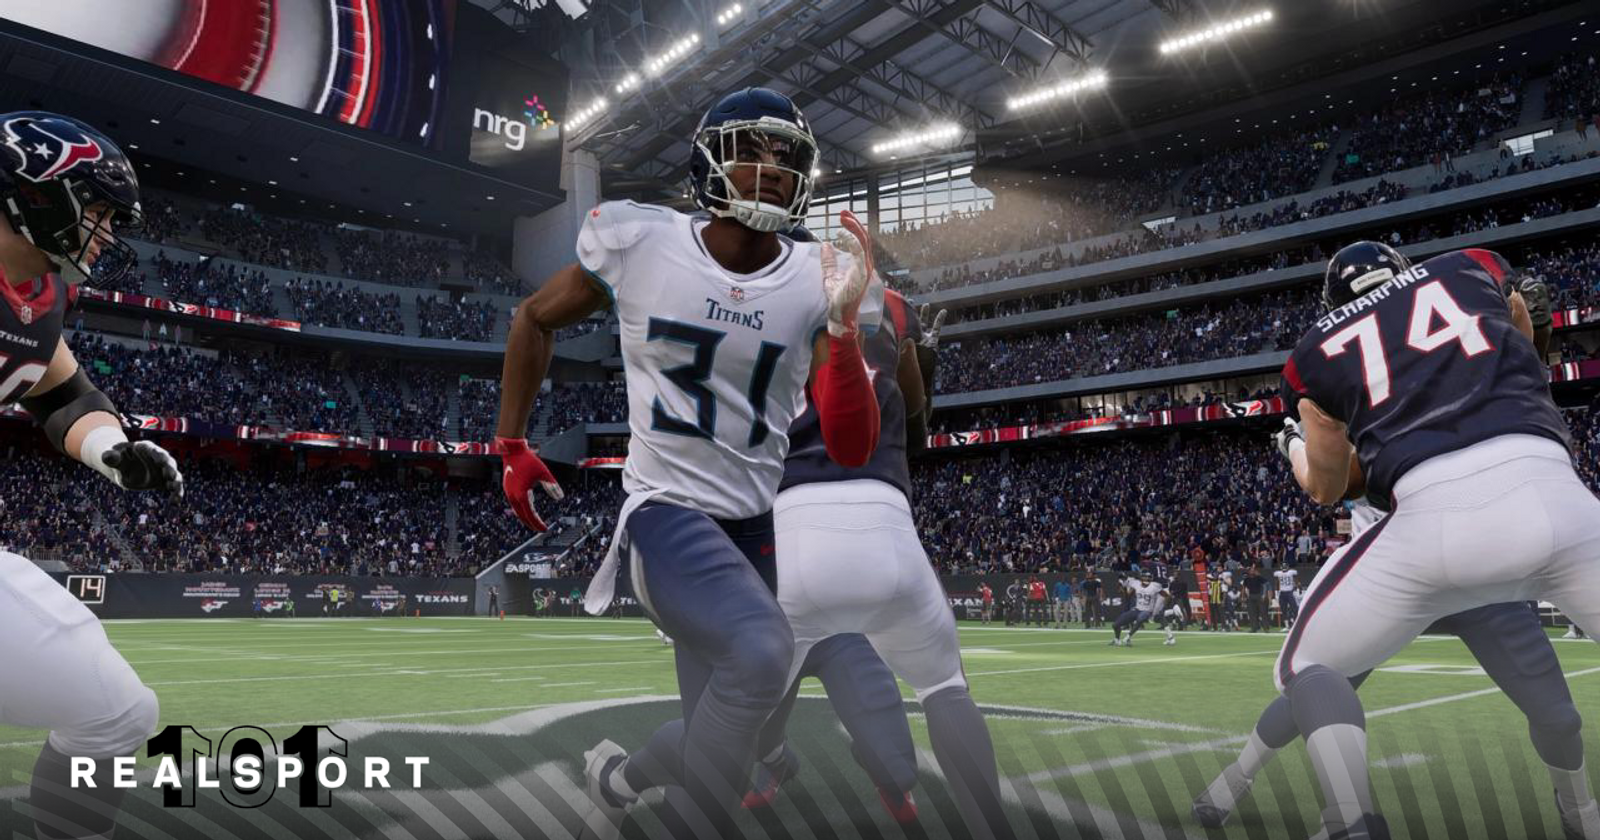 Madden 23 Ratings: Cornerback revealed with Jalen Ramsey top